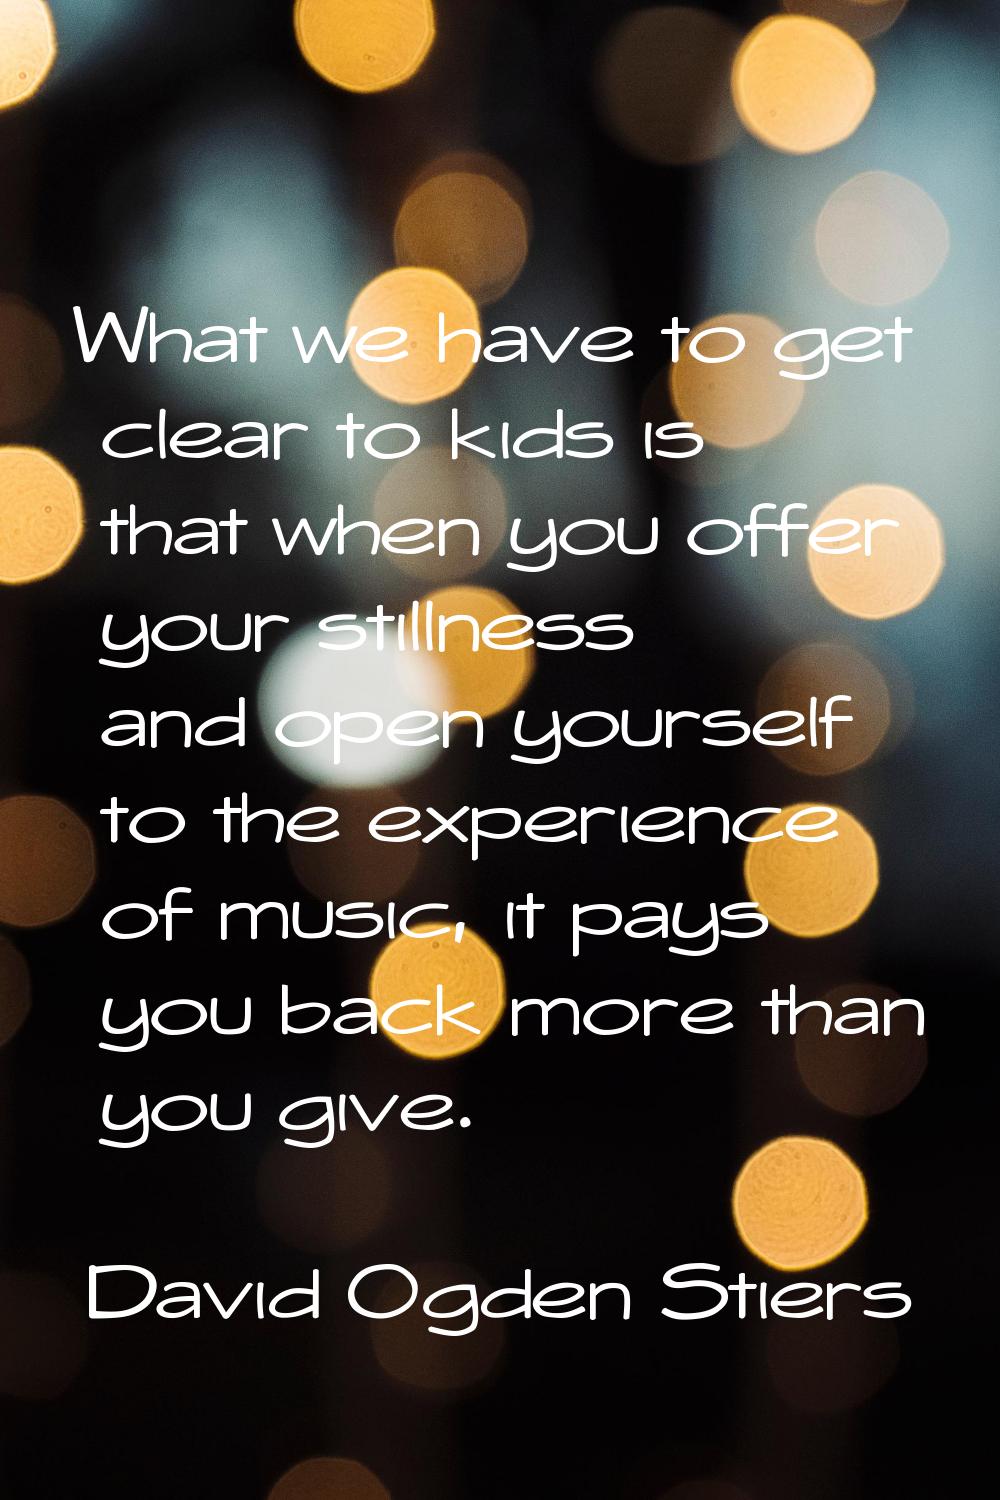 What we have to get clear to kids is that when you offer your stillness and open yourself to the ex